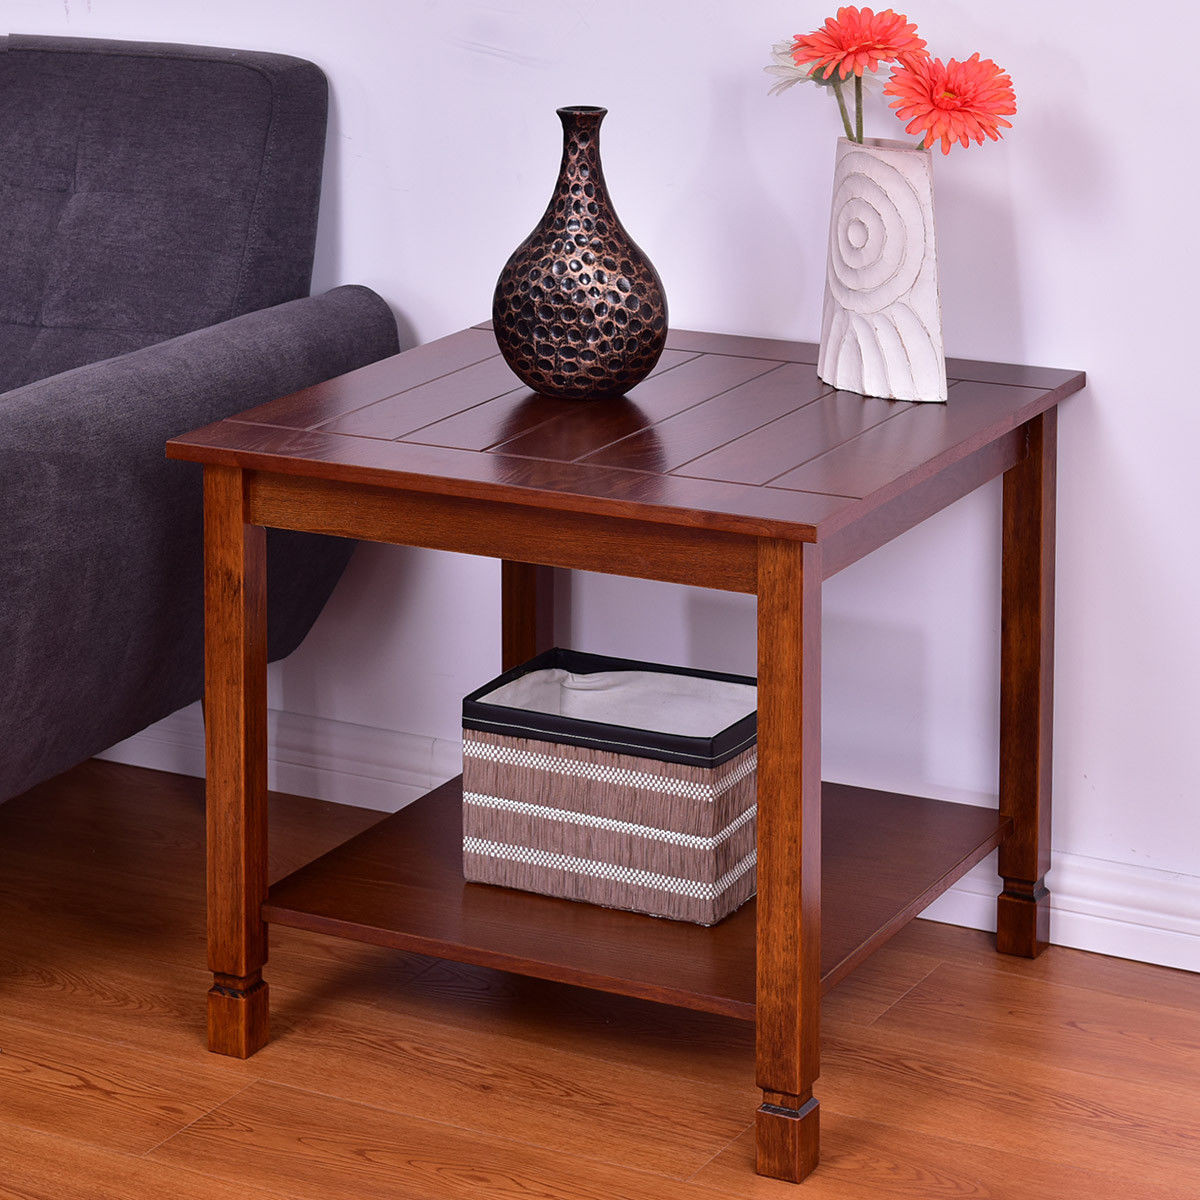 Living Room Table With Storage
 Giantex Wood Side Table Living Room End Table Night Stand